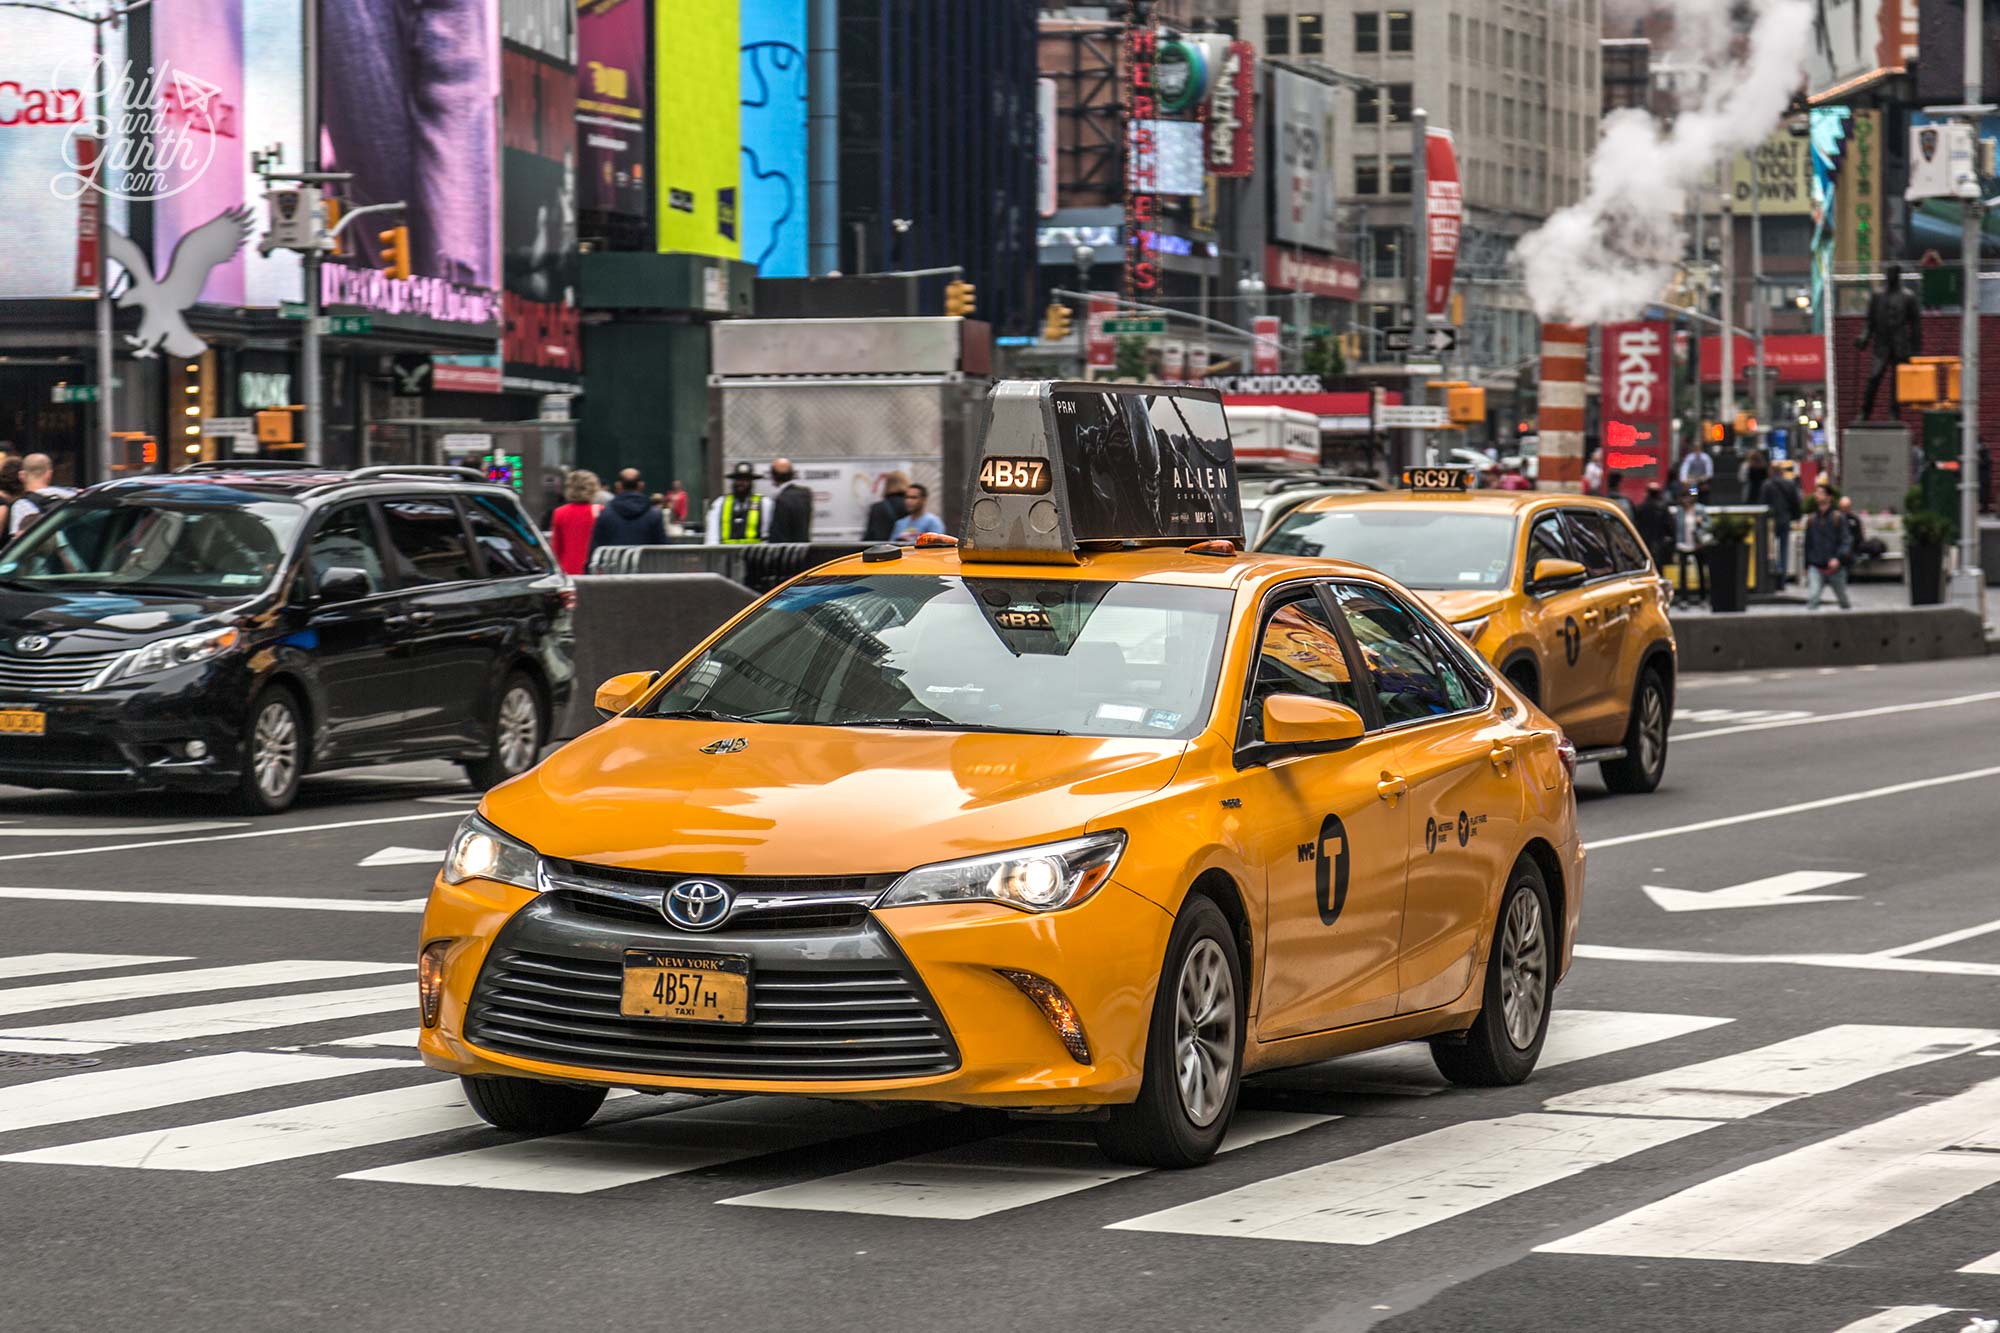 The classic yellow cabs are now electric hybrid vehicles